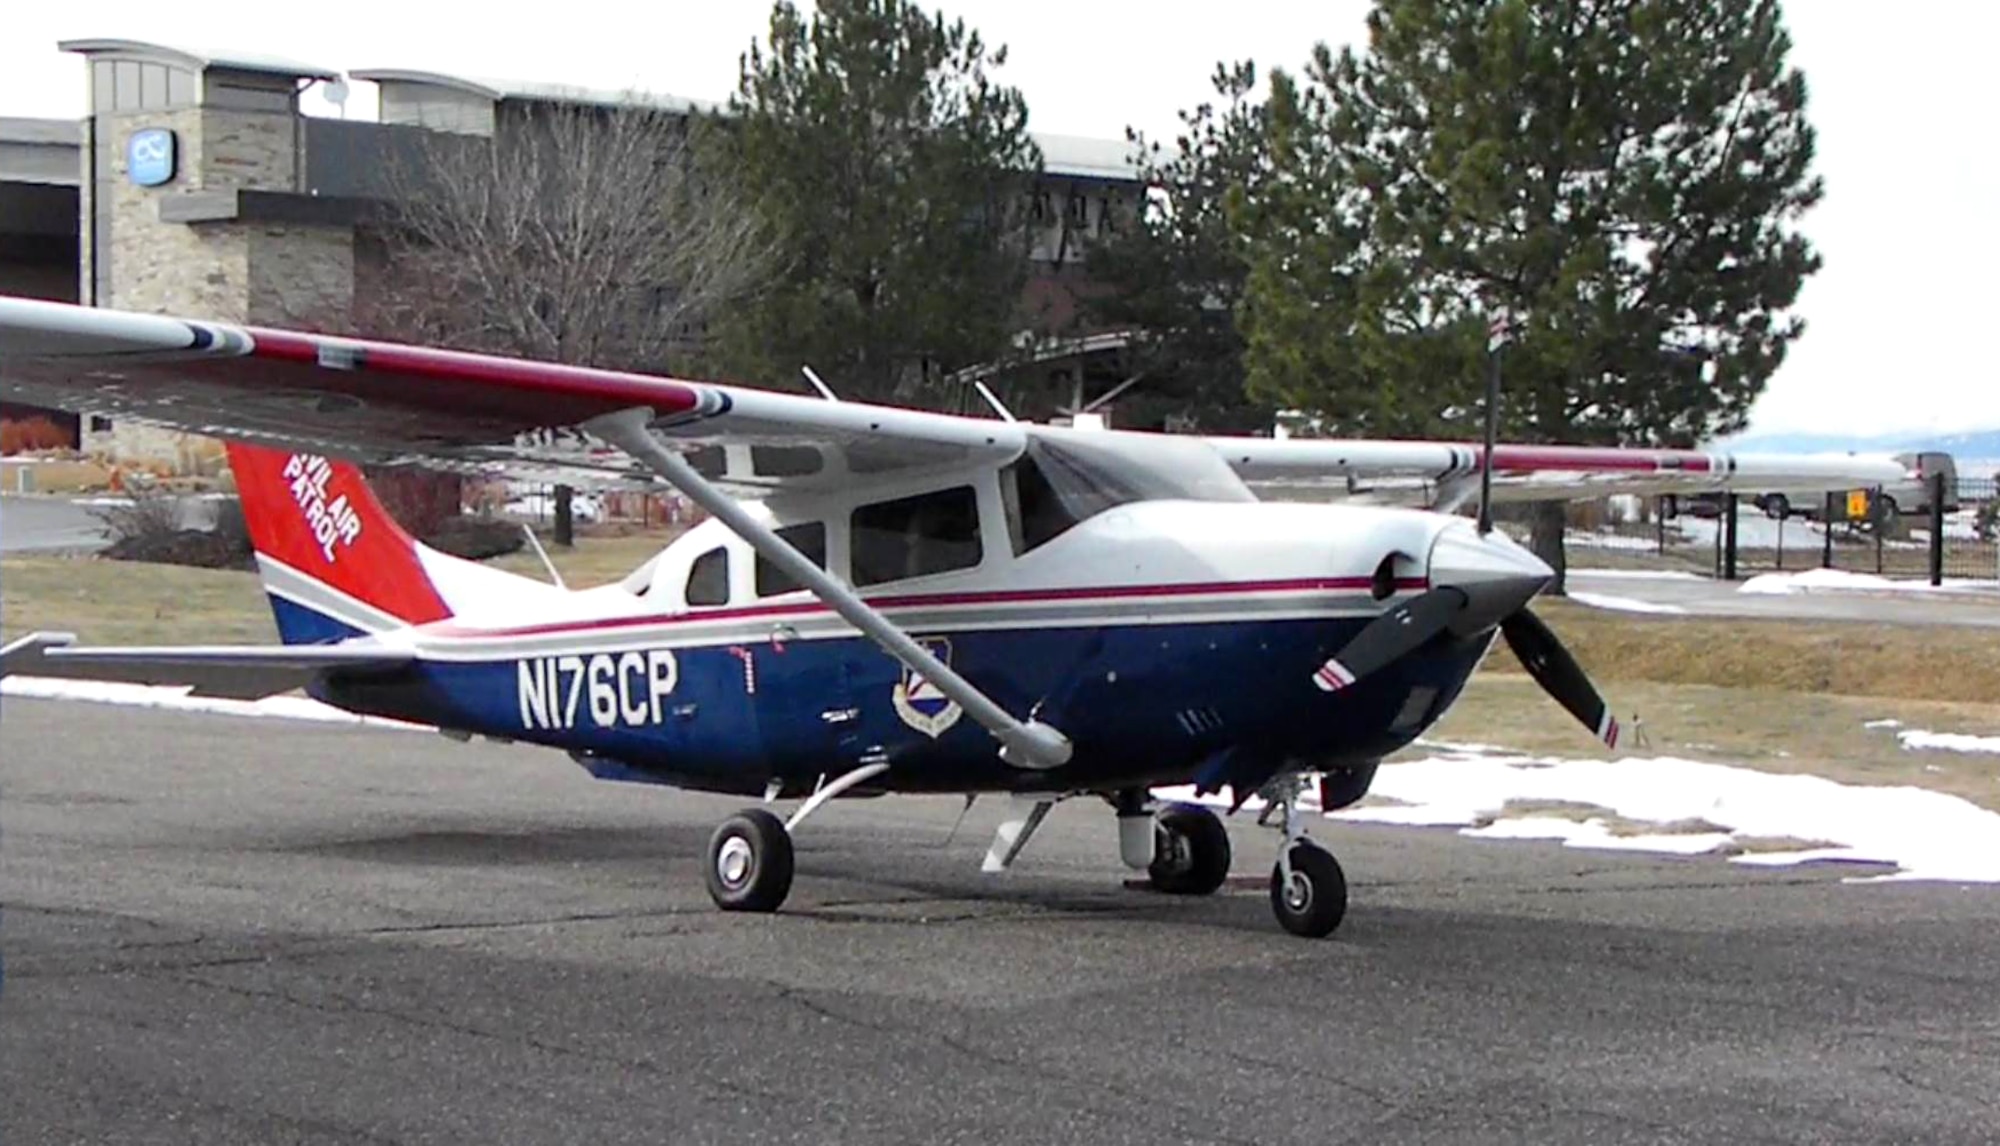 An enhanced Surrogate Predator 3 is prepared for takeoff. Intelligence, surveillance and reconnaissance sensors were added to the Cessna 182 so it can mimic a Predator unmanned aerial vehicle. Air Force Research Laboratory’s Directed Energy Directorate at Kirtland Air Force Base, N.M., modified the Civil Air Patrol aircraft for use in military training exercises. (Courtesy photo)